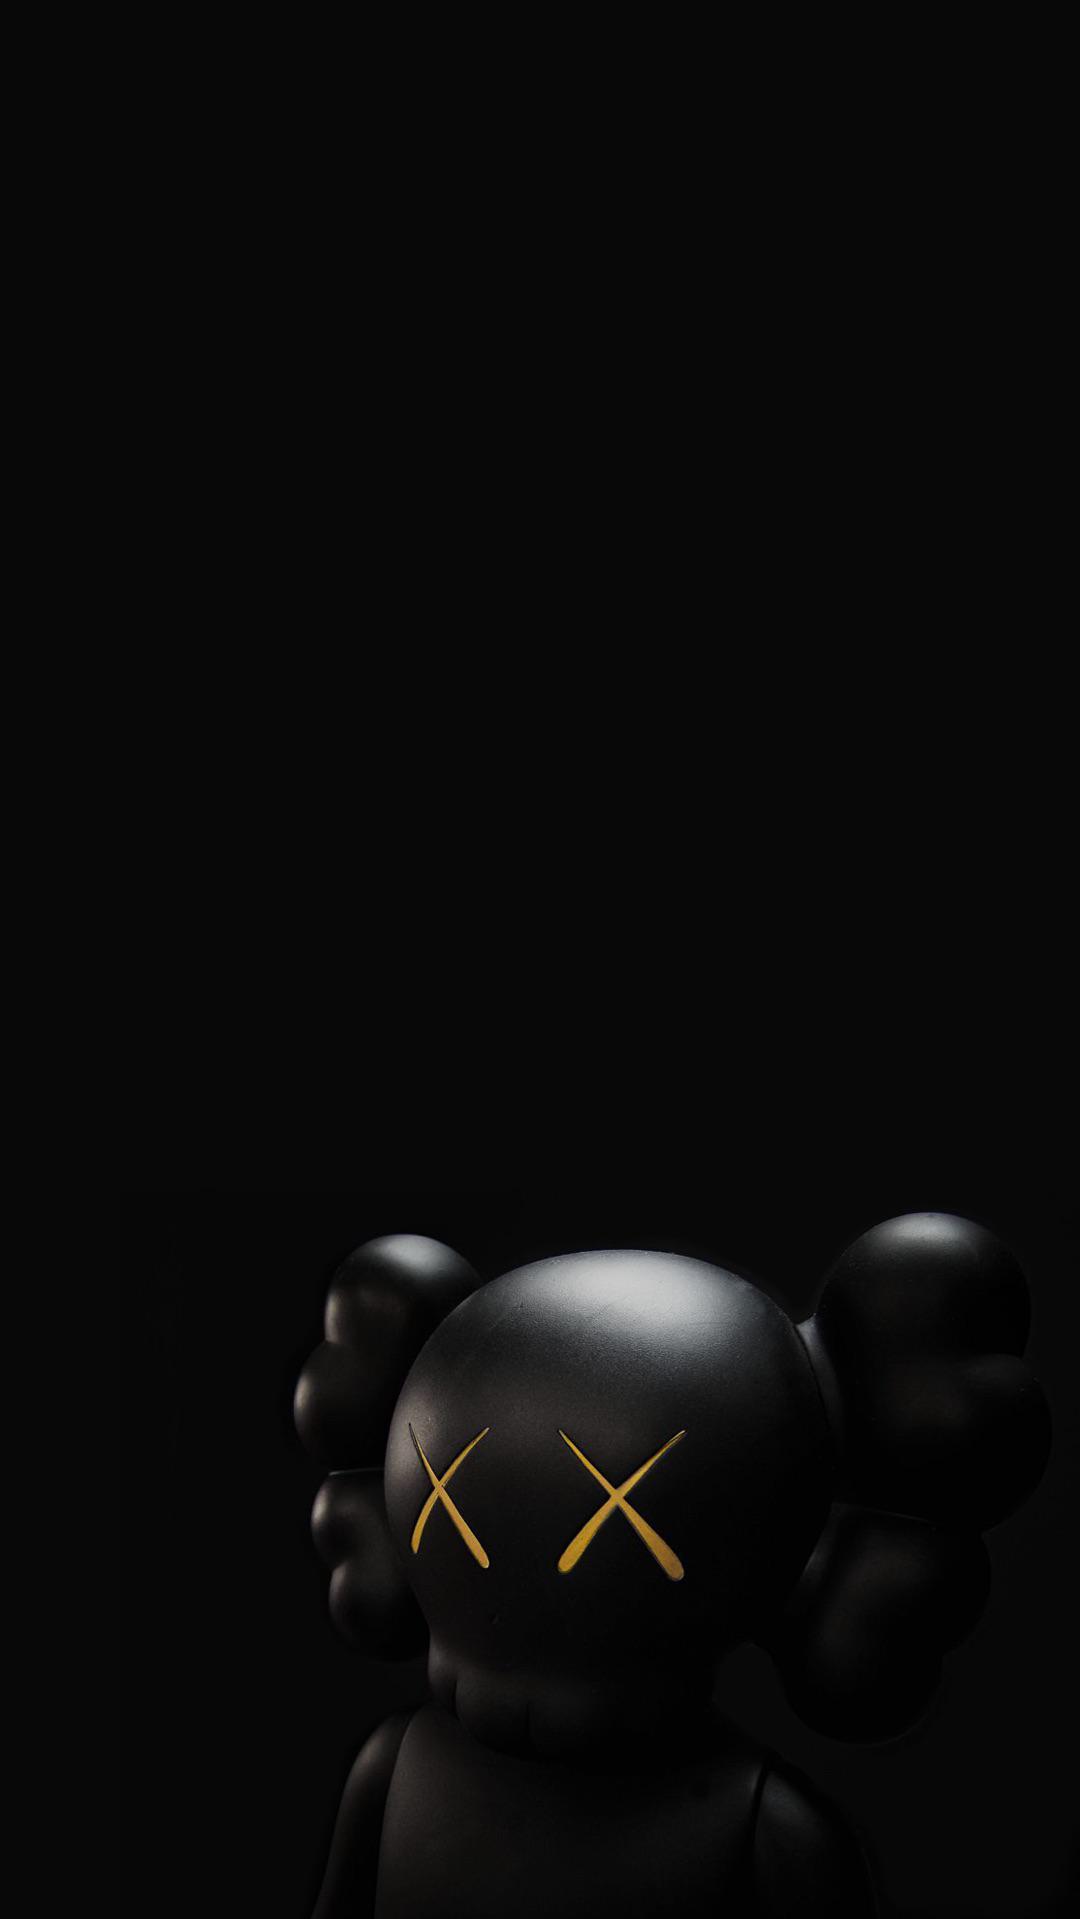 Hi everyone I just wanted to share some Kaws wallpaper and to